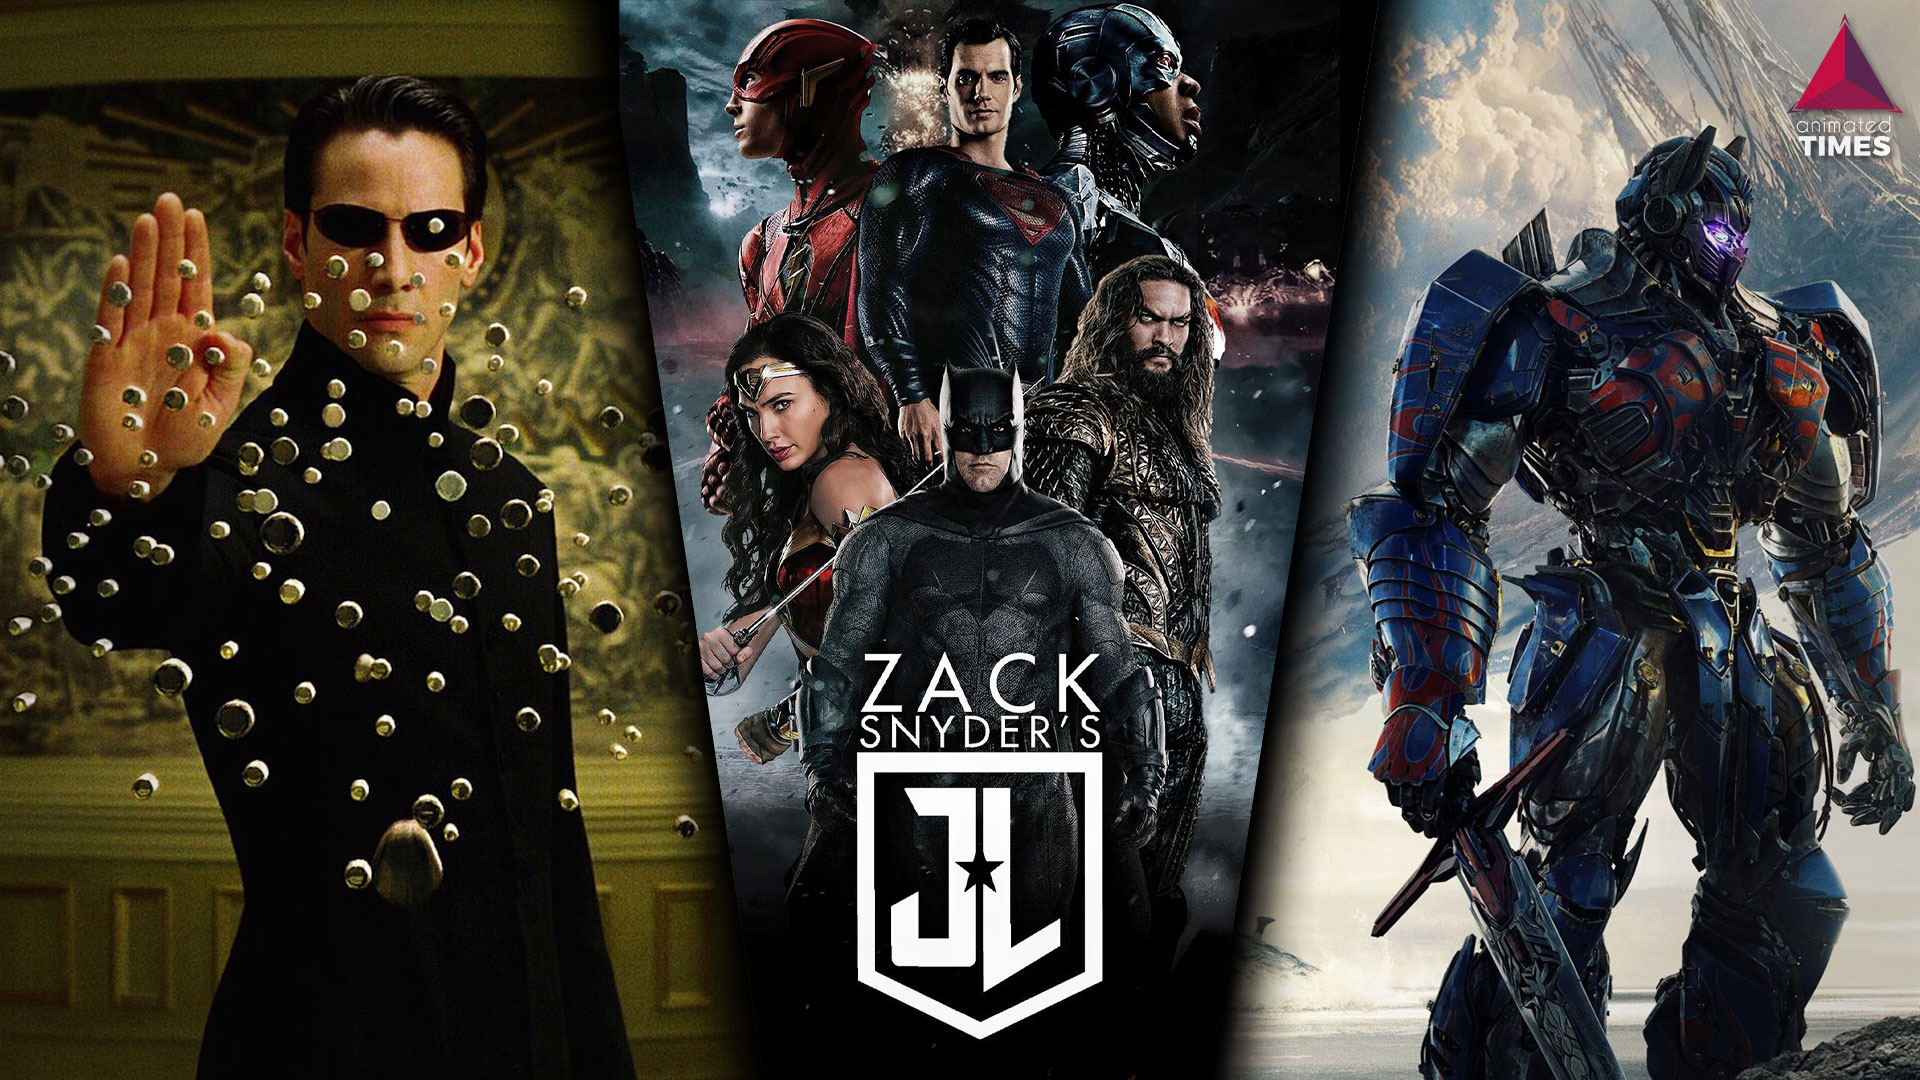 3 15 Movie Franchises that Should Be ‘Snyderized’ After Zack Snyder’s Justice League